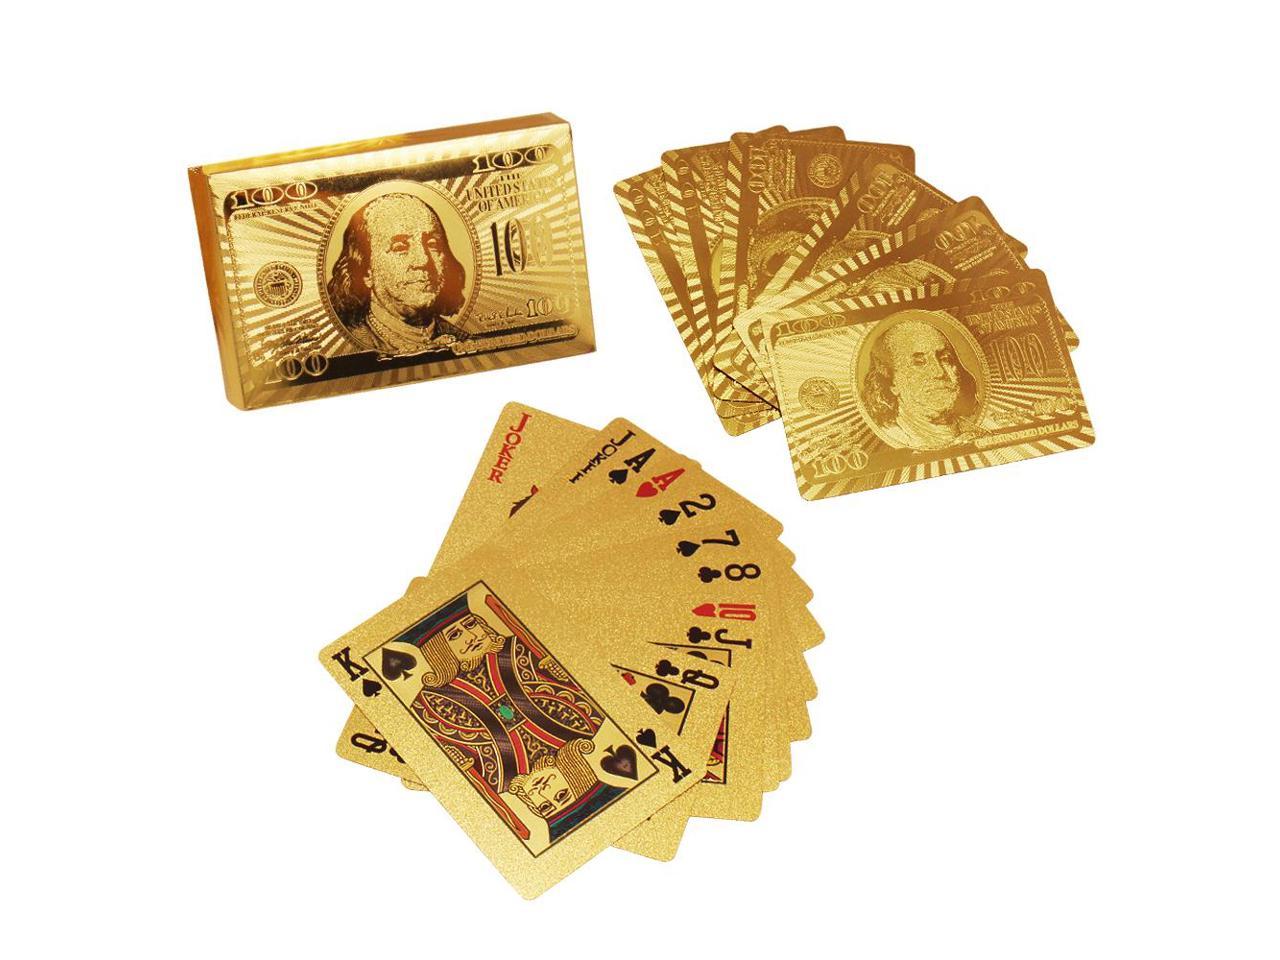 24K Carat Gold Plated Poker Playing Cards Set,Brand New,Free Shipping! 